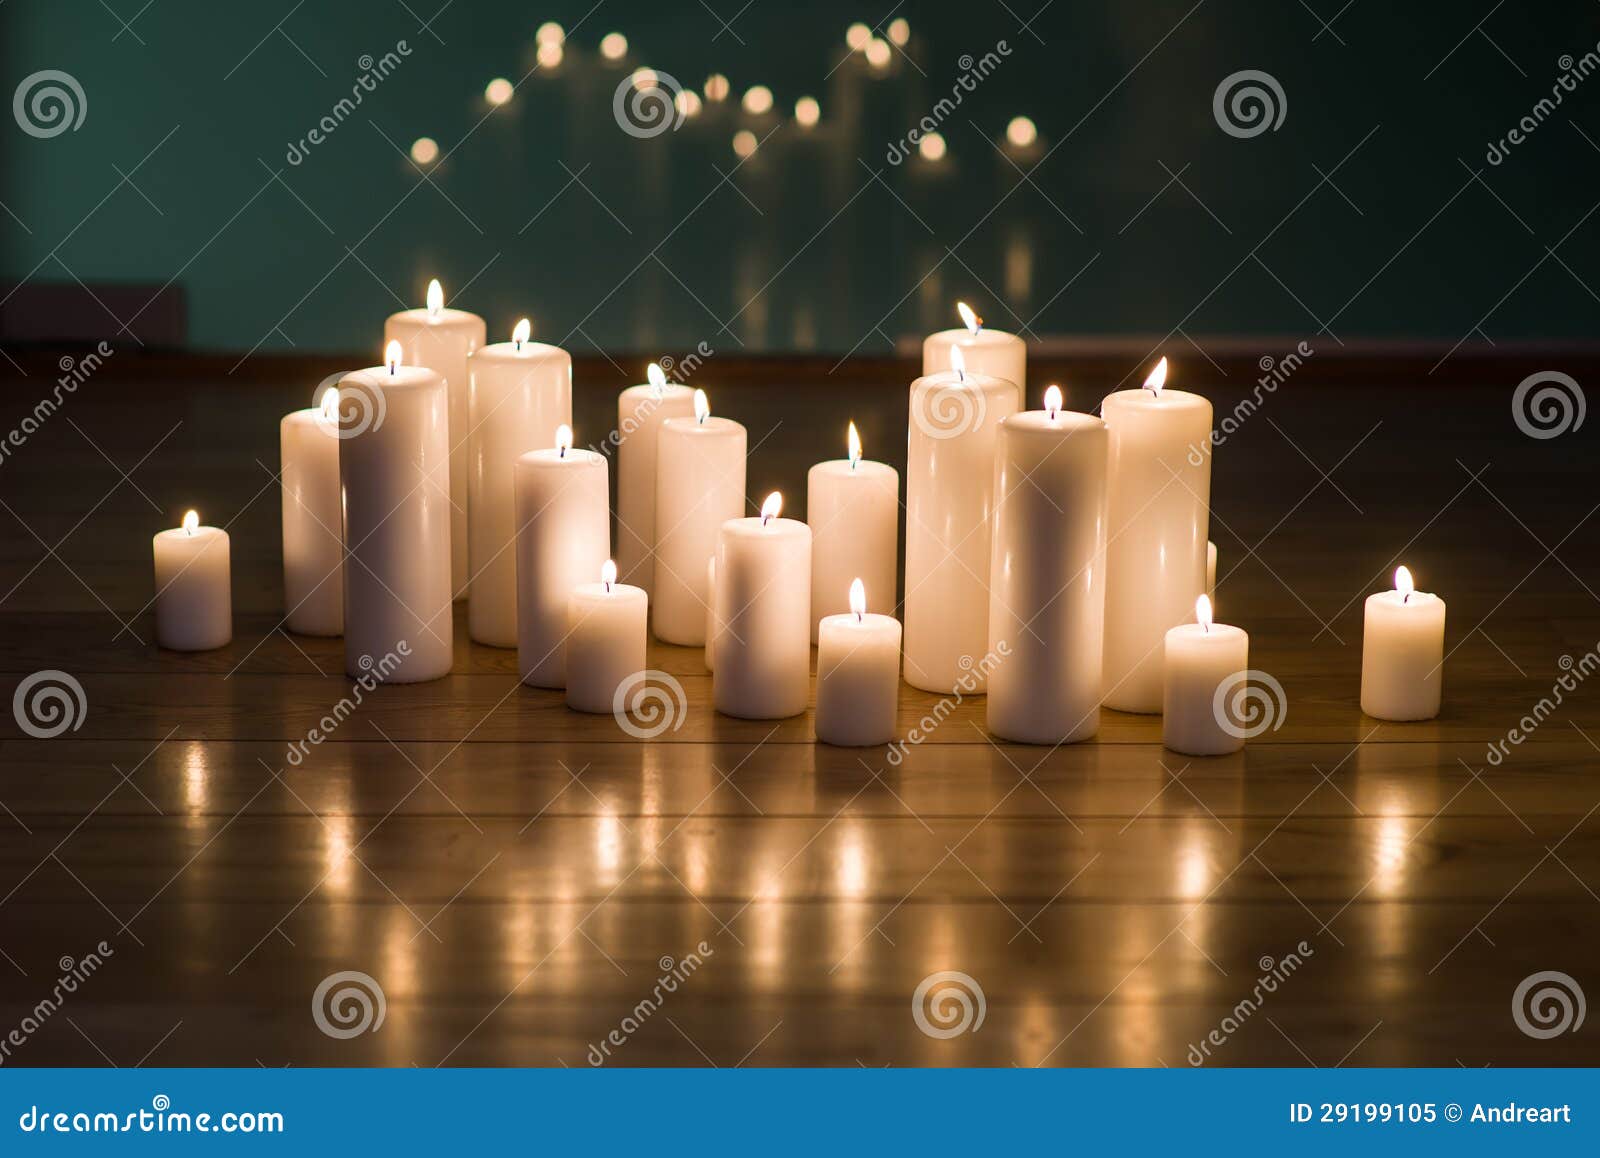 Arrangement of candles stock image. Image of flames, flame - 29199105